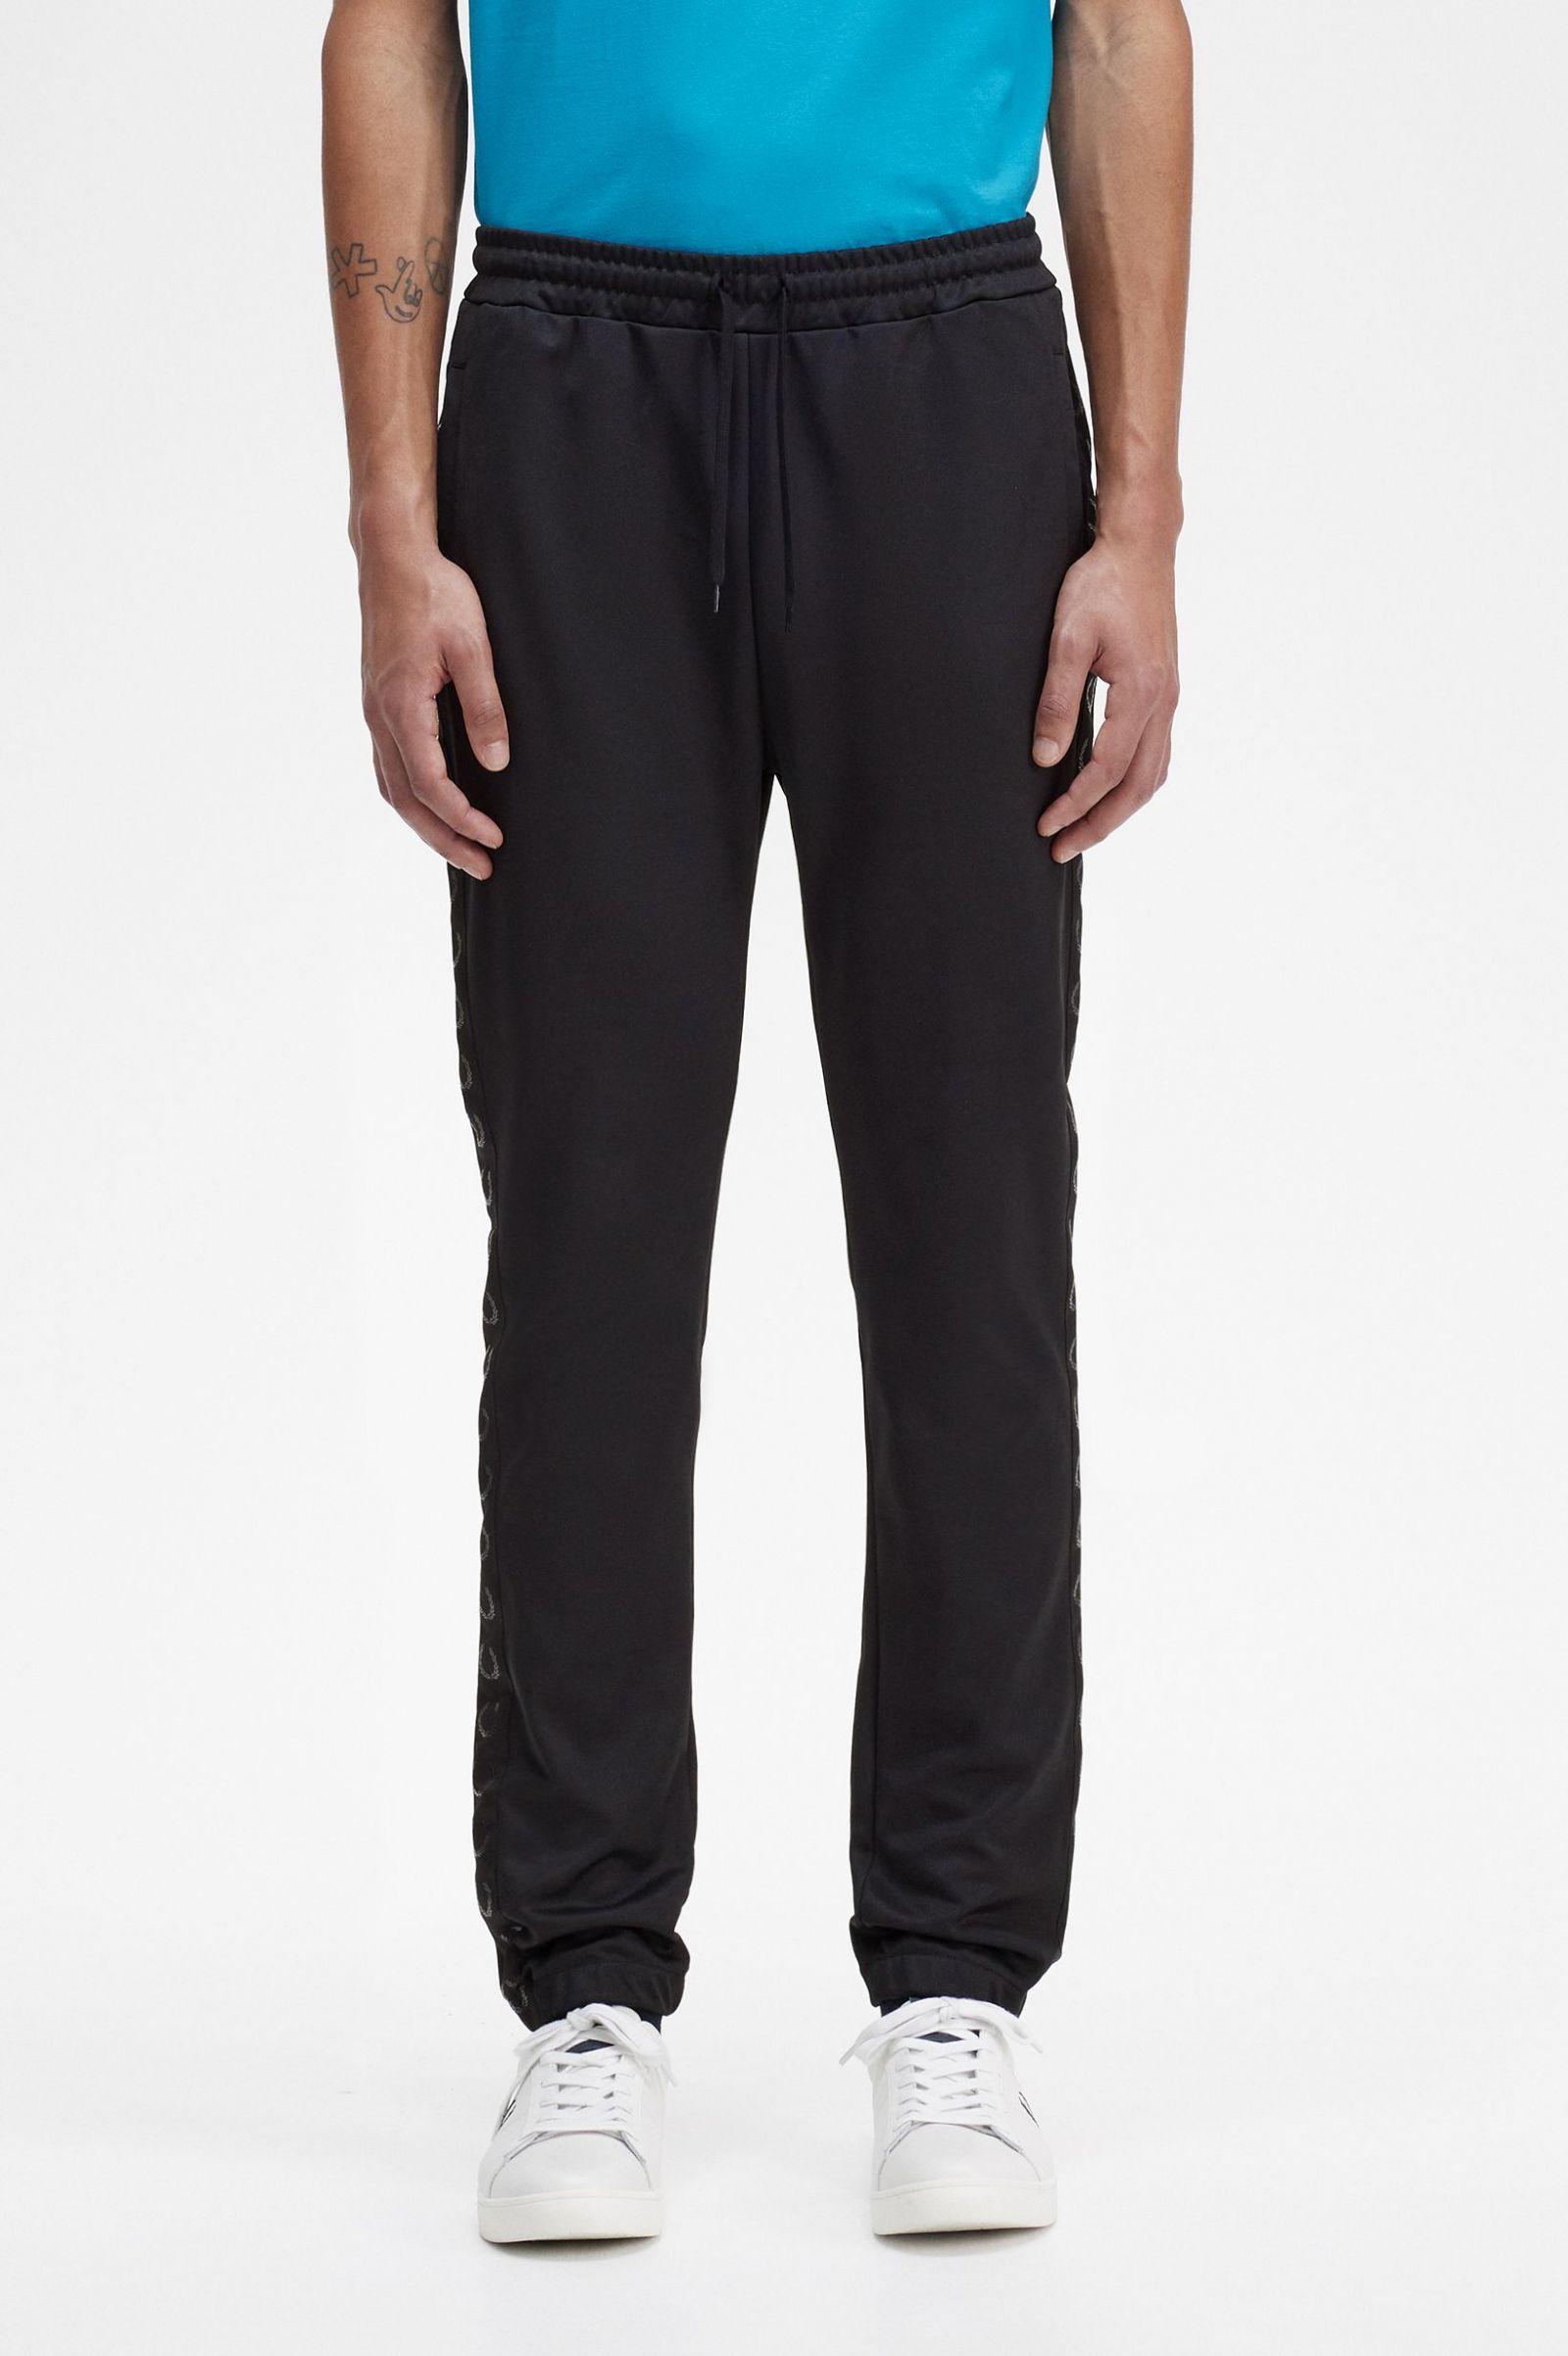 Taped Track Pants - Black / Black | Men's Trousers | Chinos, Joggers ...